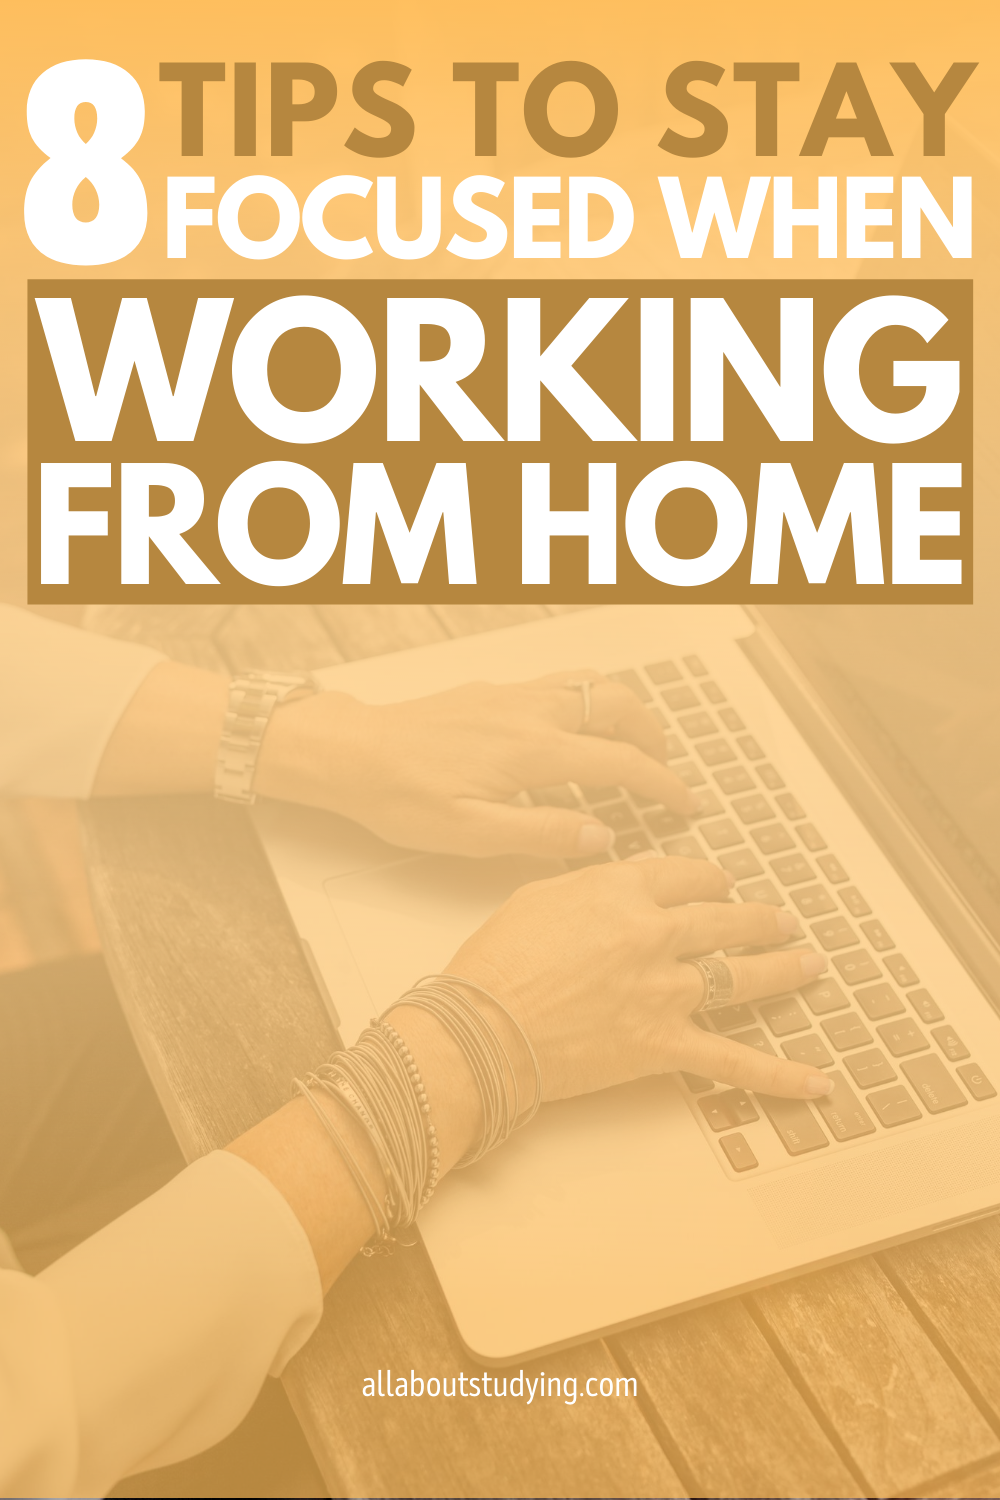 Tips To Improve Your Focus When Working From Home, Work from home productivity advice #workfromhome #workingfromhome #workingremotely #workremotely #workathome #focus #focustips 